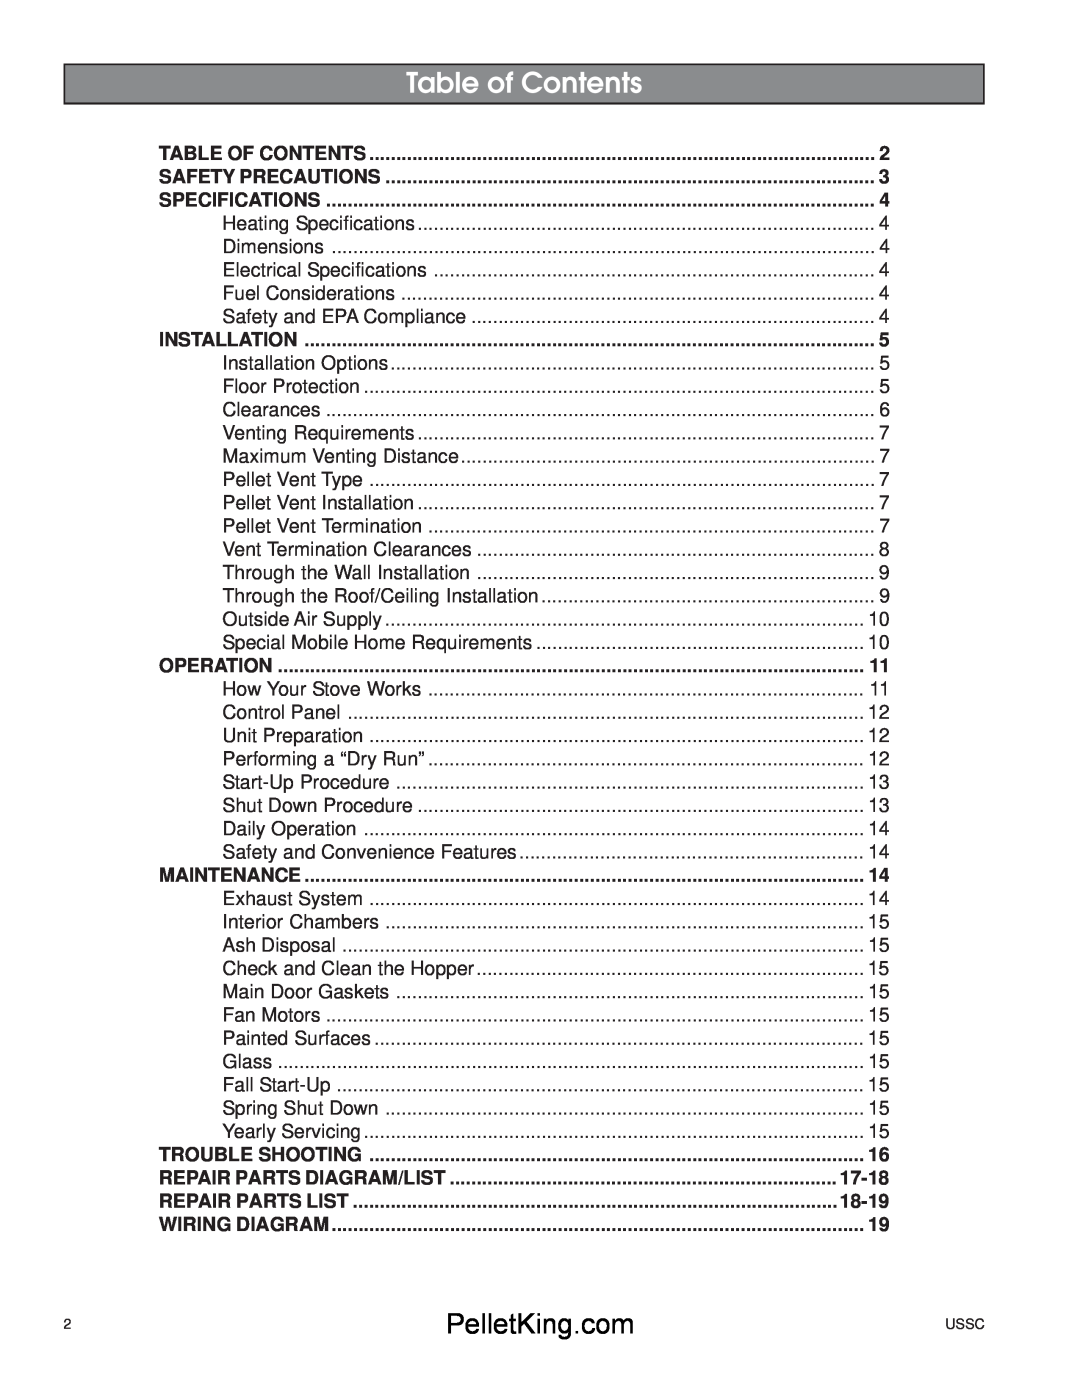 United States Stove 5500/5500XL owner manual Table of Contents, Repair Parts Diagram/List, 17-18, Repair Parts List, 18-19 